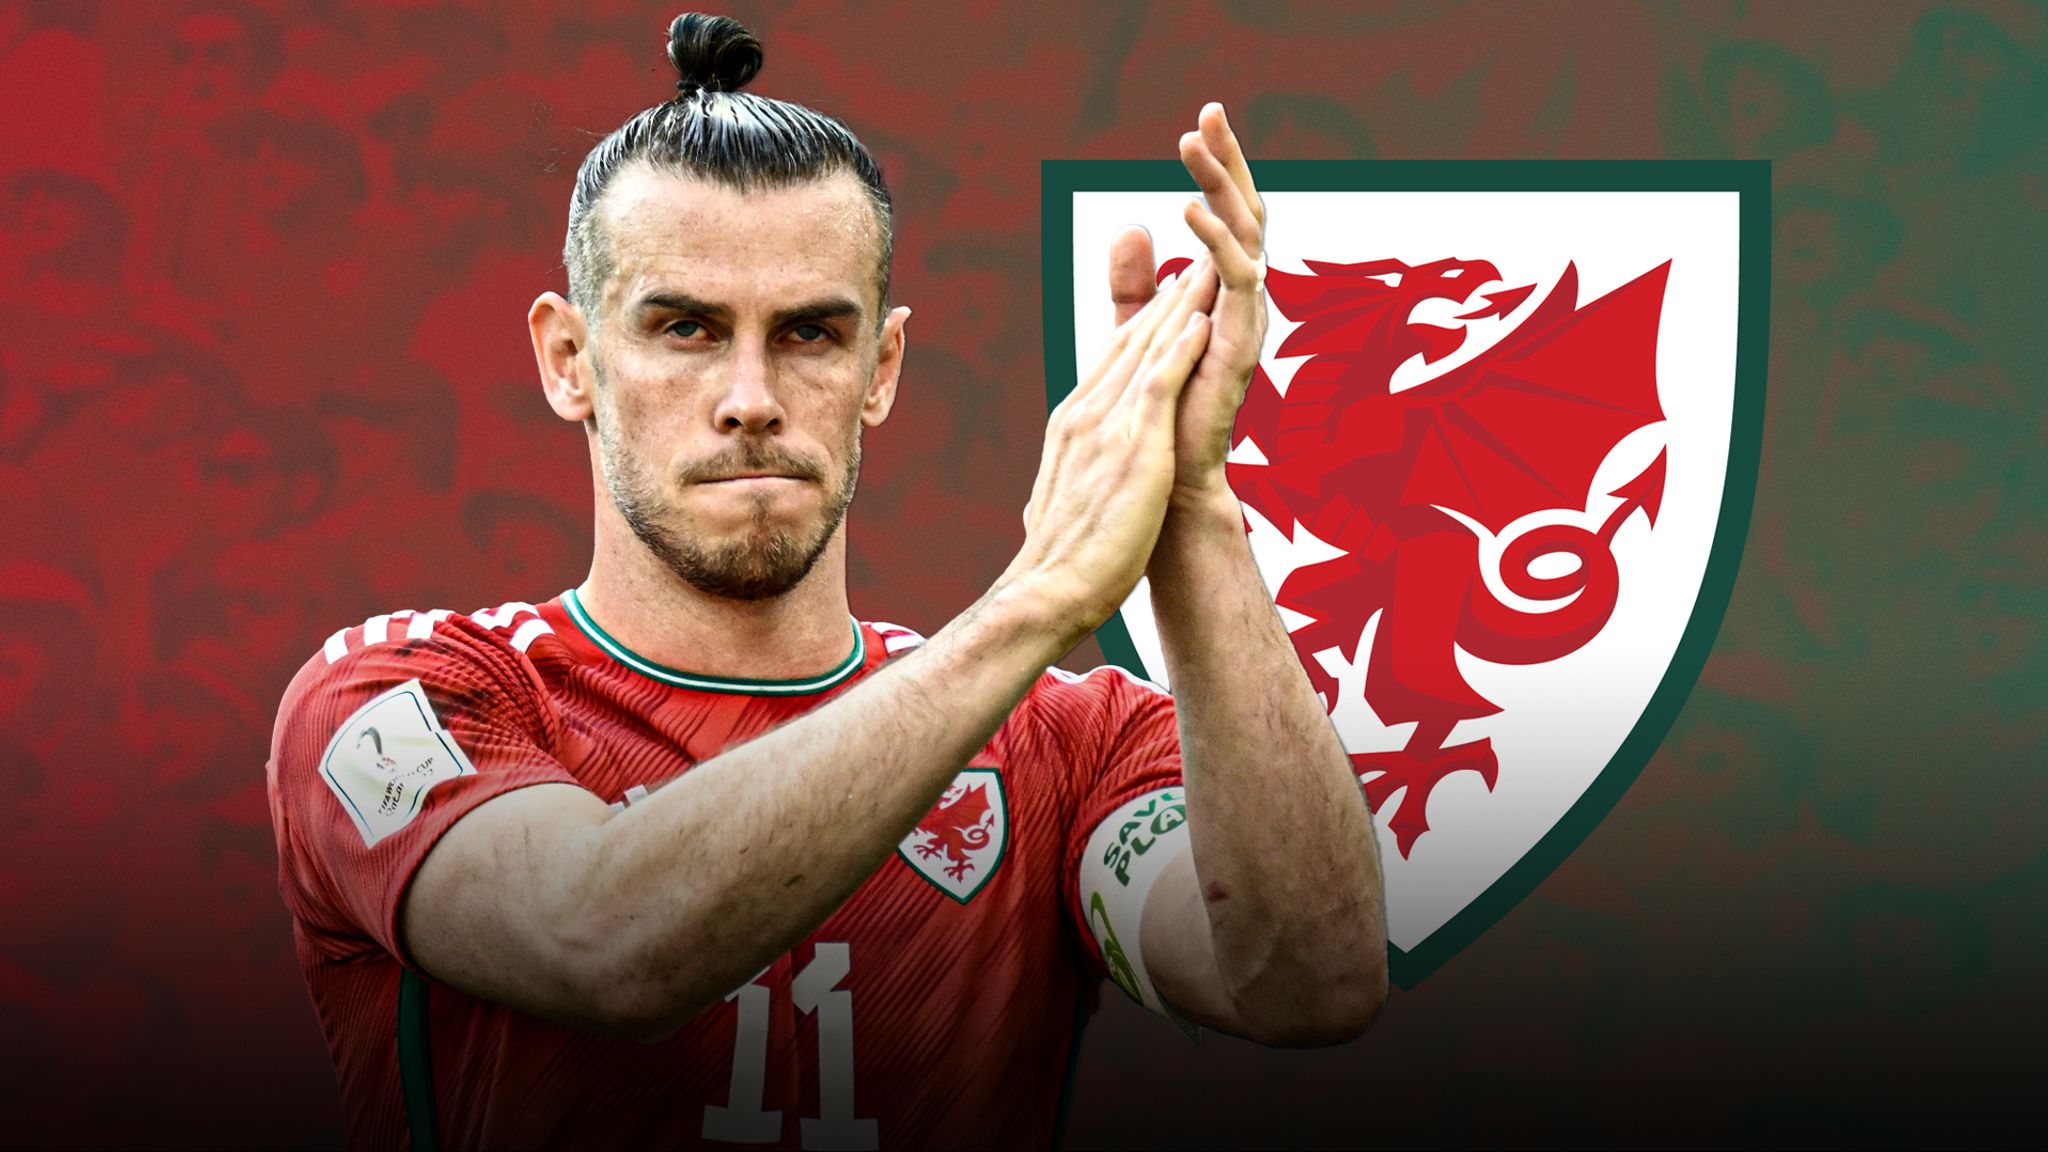 Gareth Bale’s Son, Xander Frank Bale Biography: Net Worth, Age, Siblings, Height, Mother